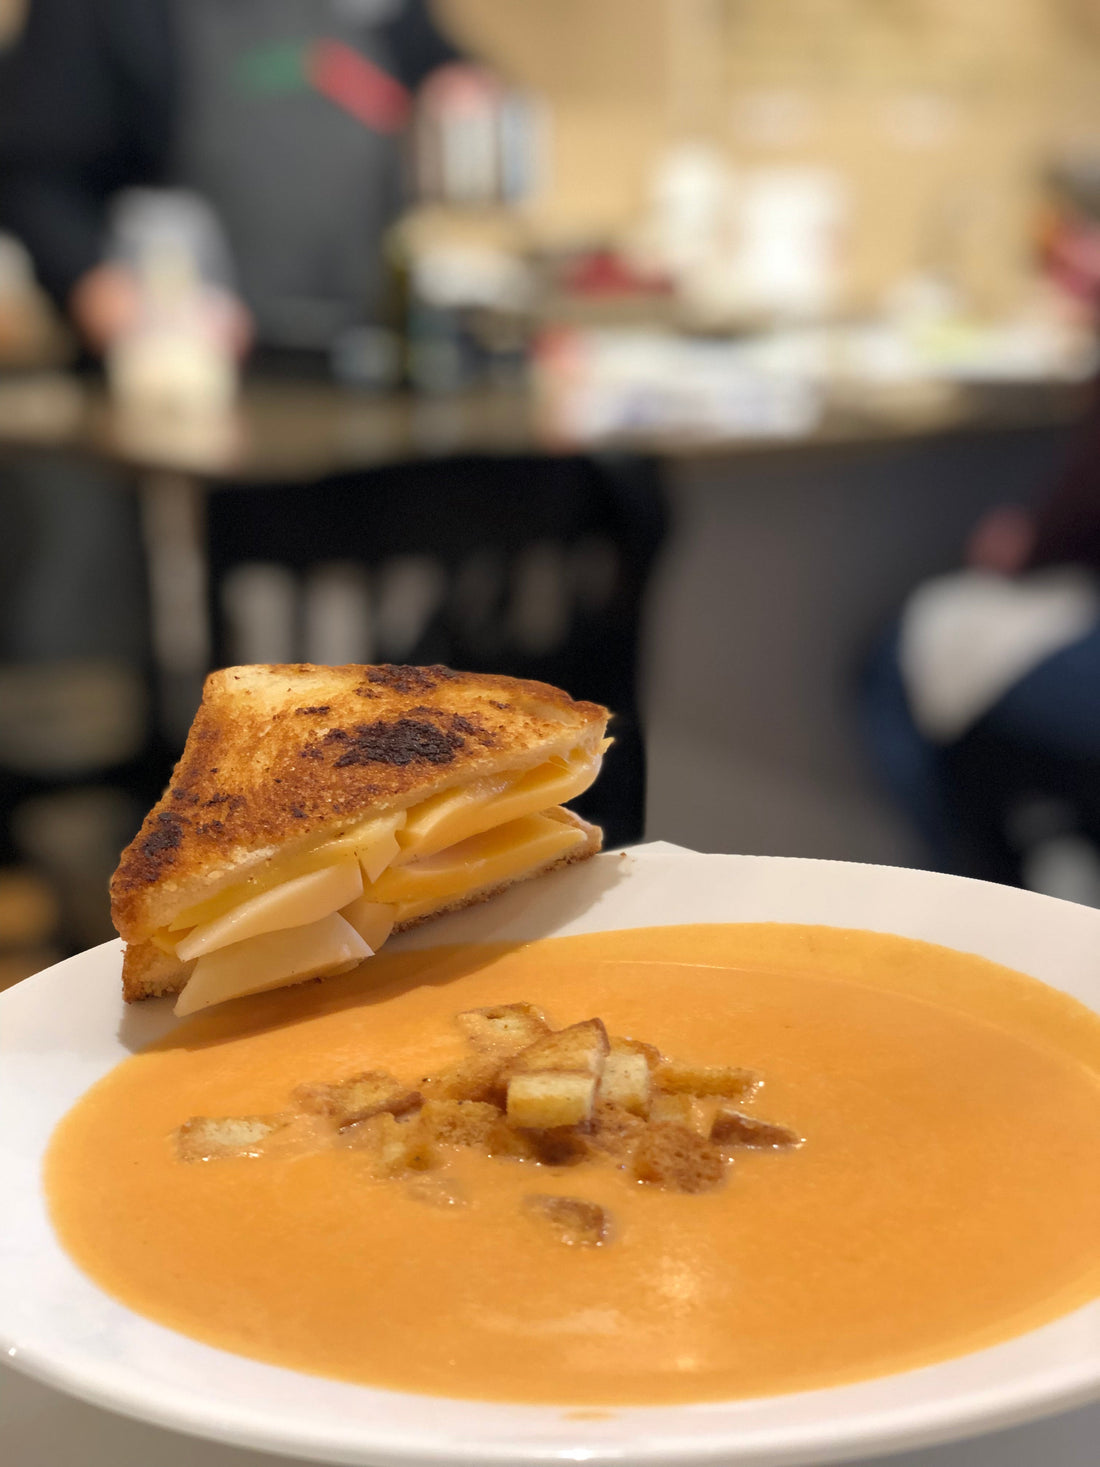 Cream of Tomato Soup with Grilled Cheese